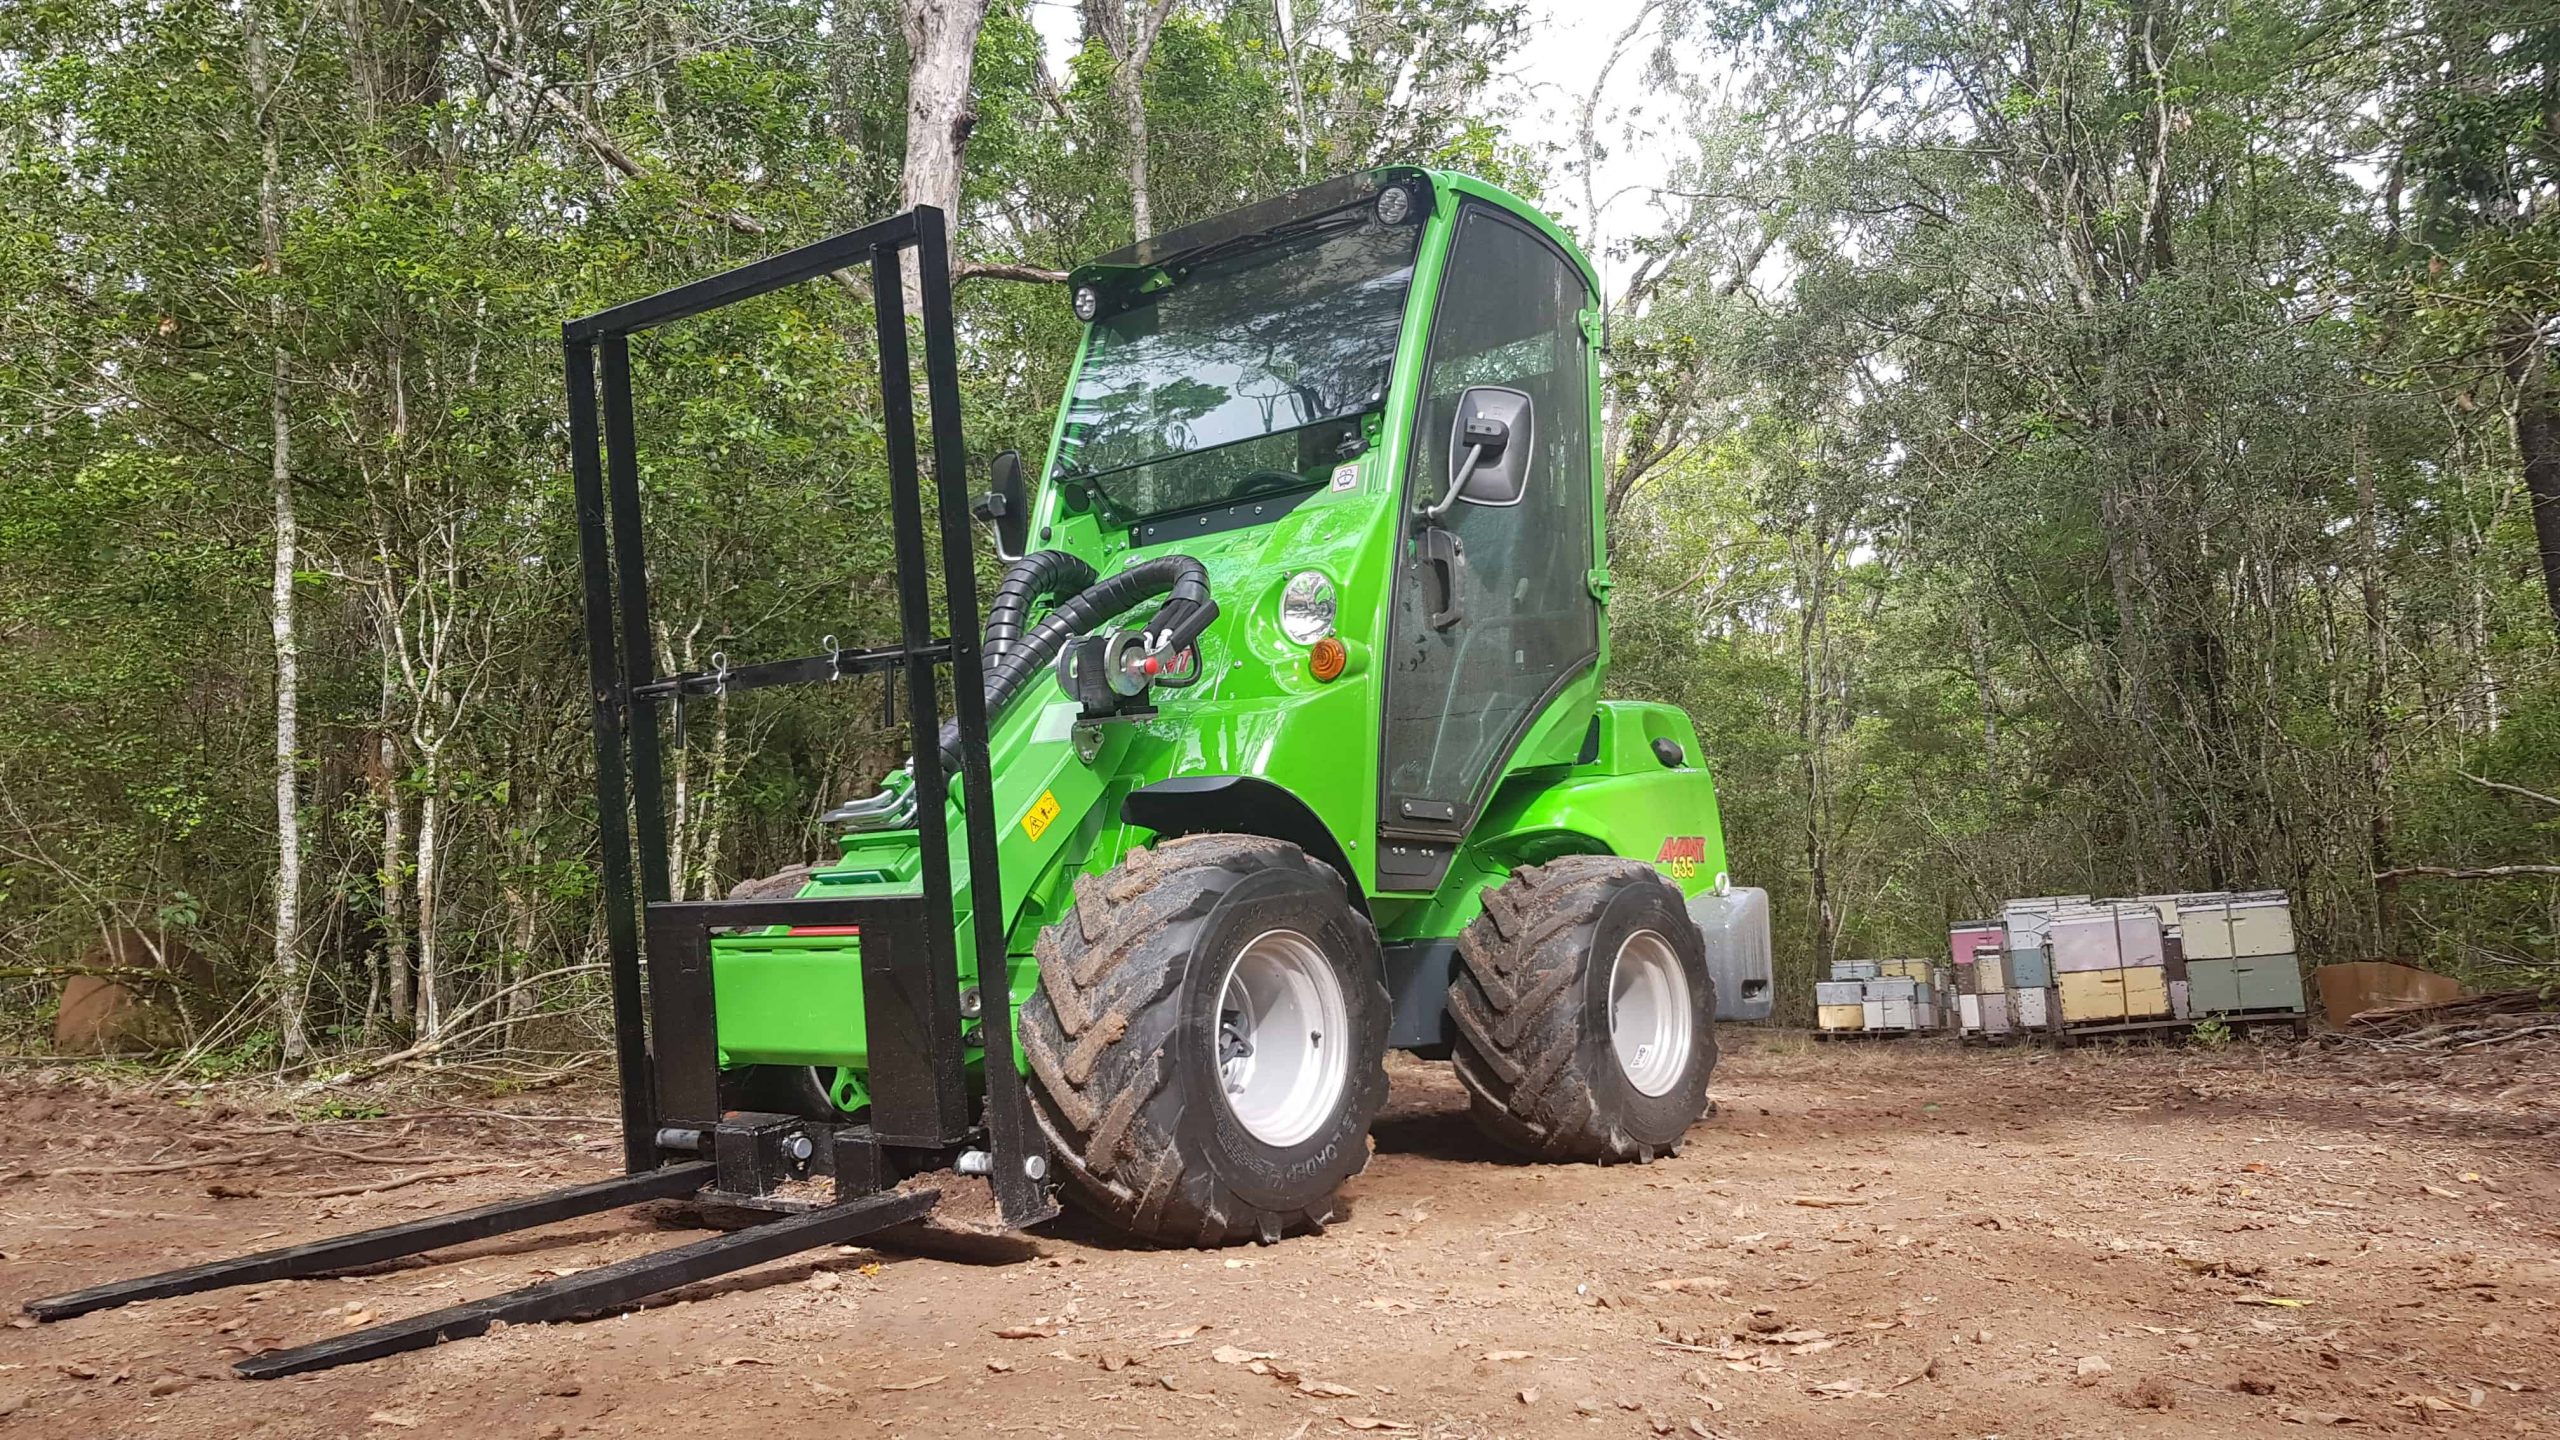 Apiarists – Add Efficiency & Comfort To Your Work With Unbeatable Avant Loader